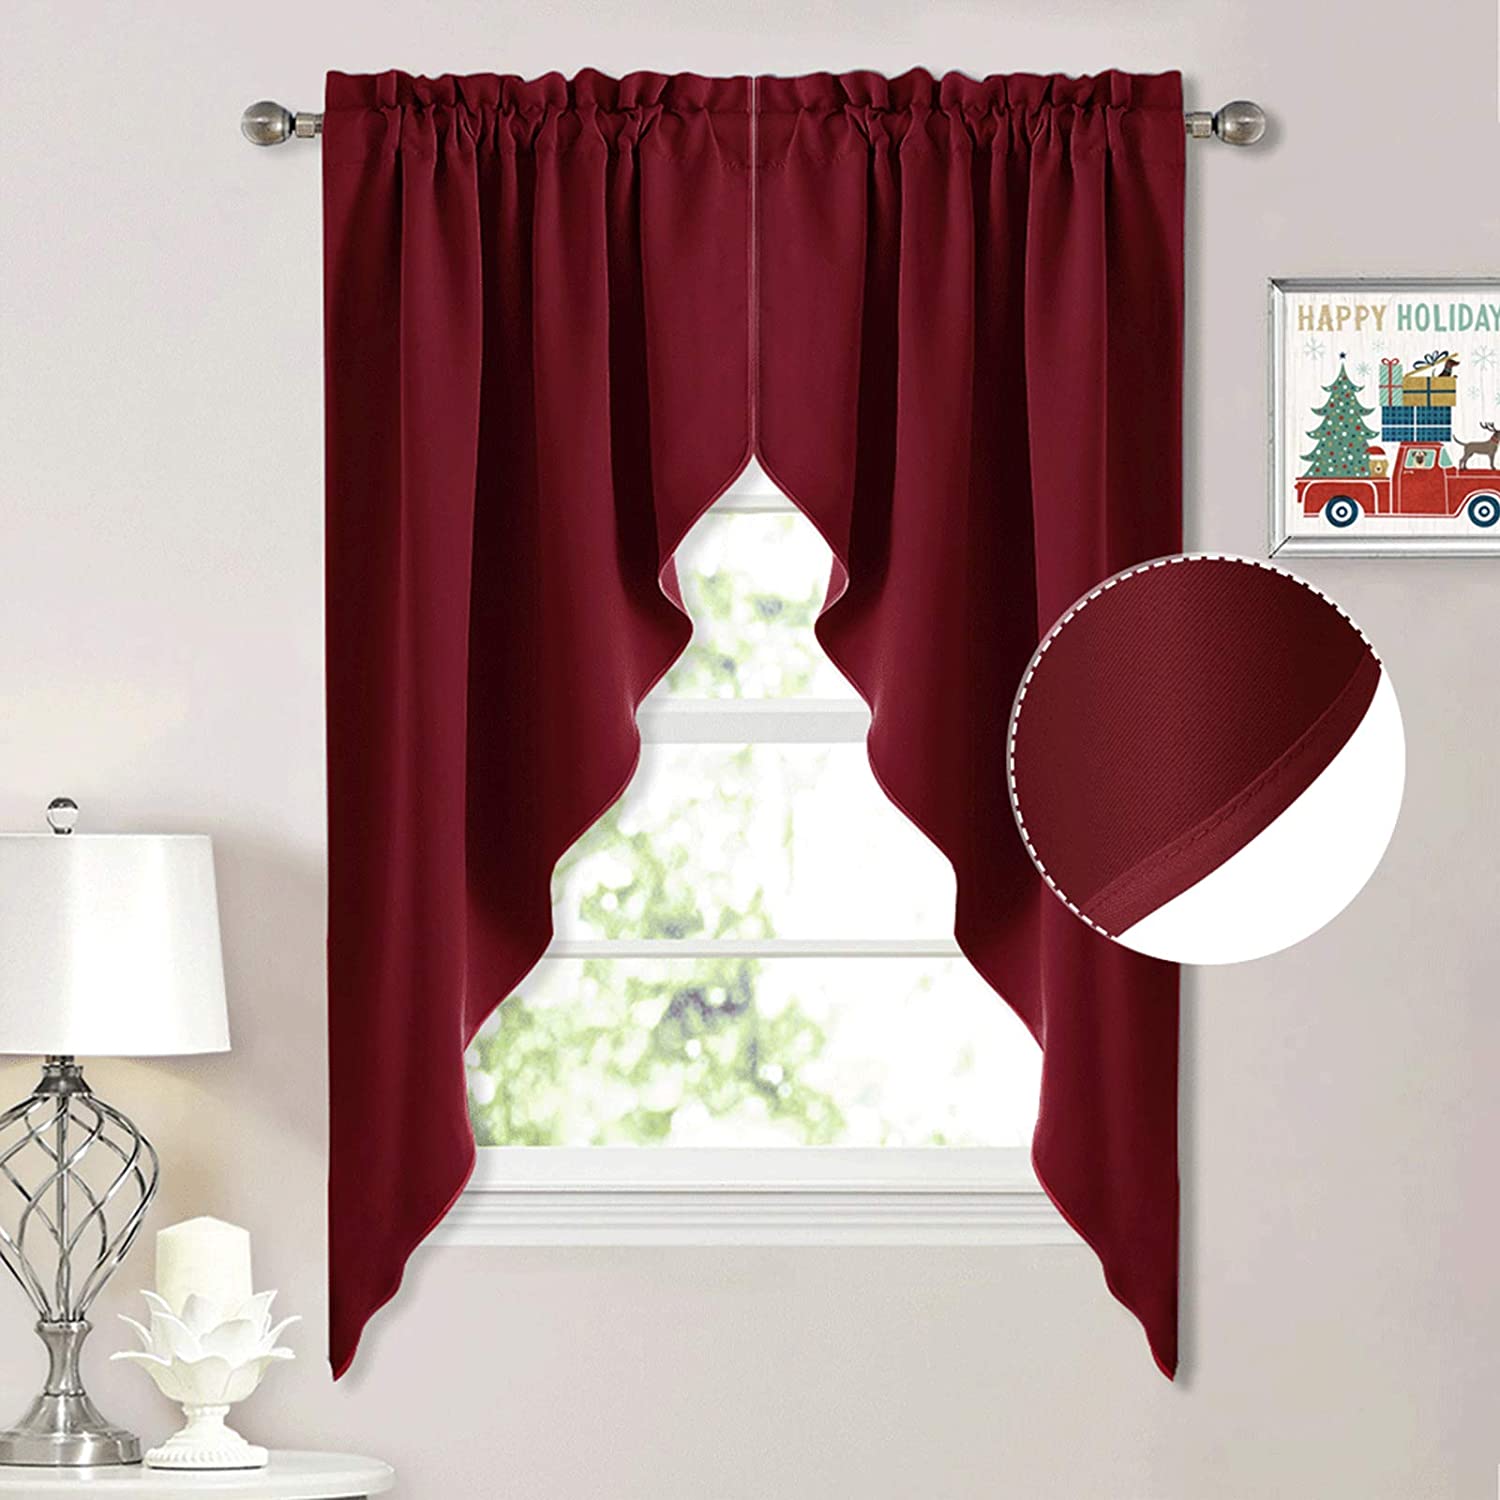 Modern  Rod Pocket Polyester Blackout Swag Valance For Kitchen And Living Room 1 Pair KGORGE Store